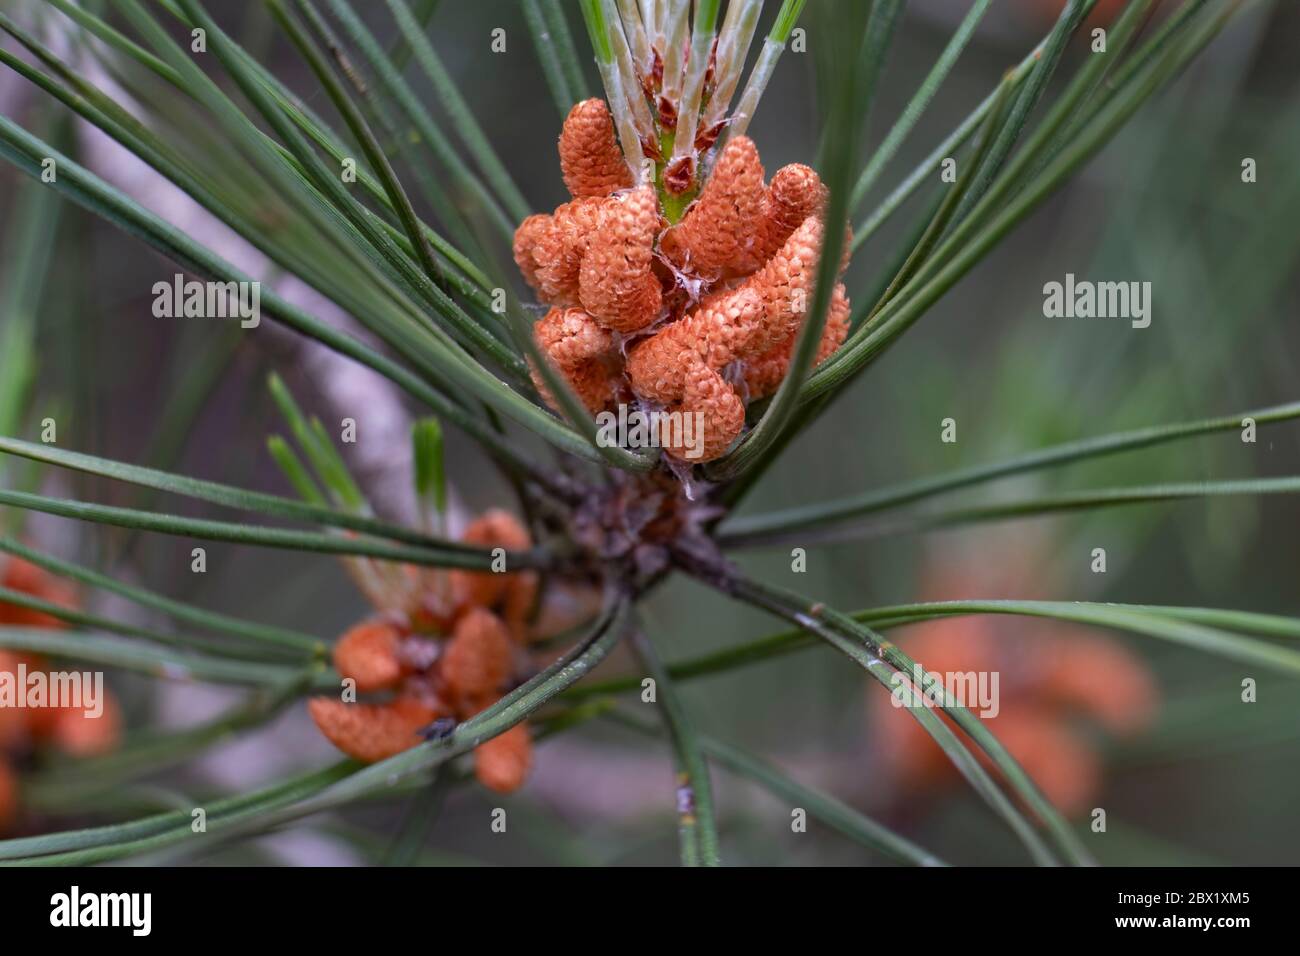 Baby Pine Cones growing on trees in an English forest, Warwickshire, UK. Stock Photo